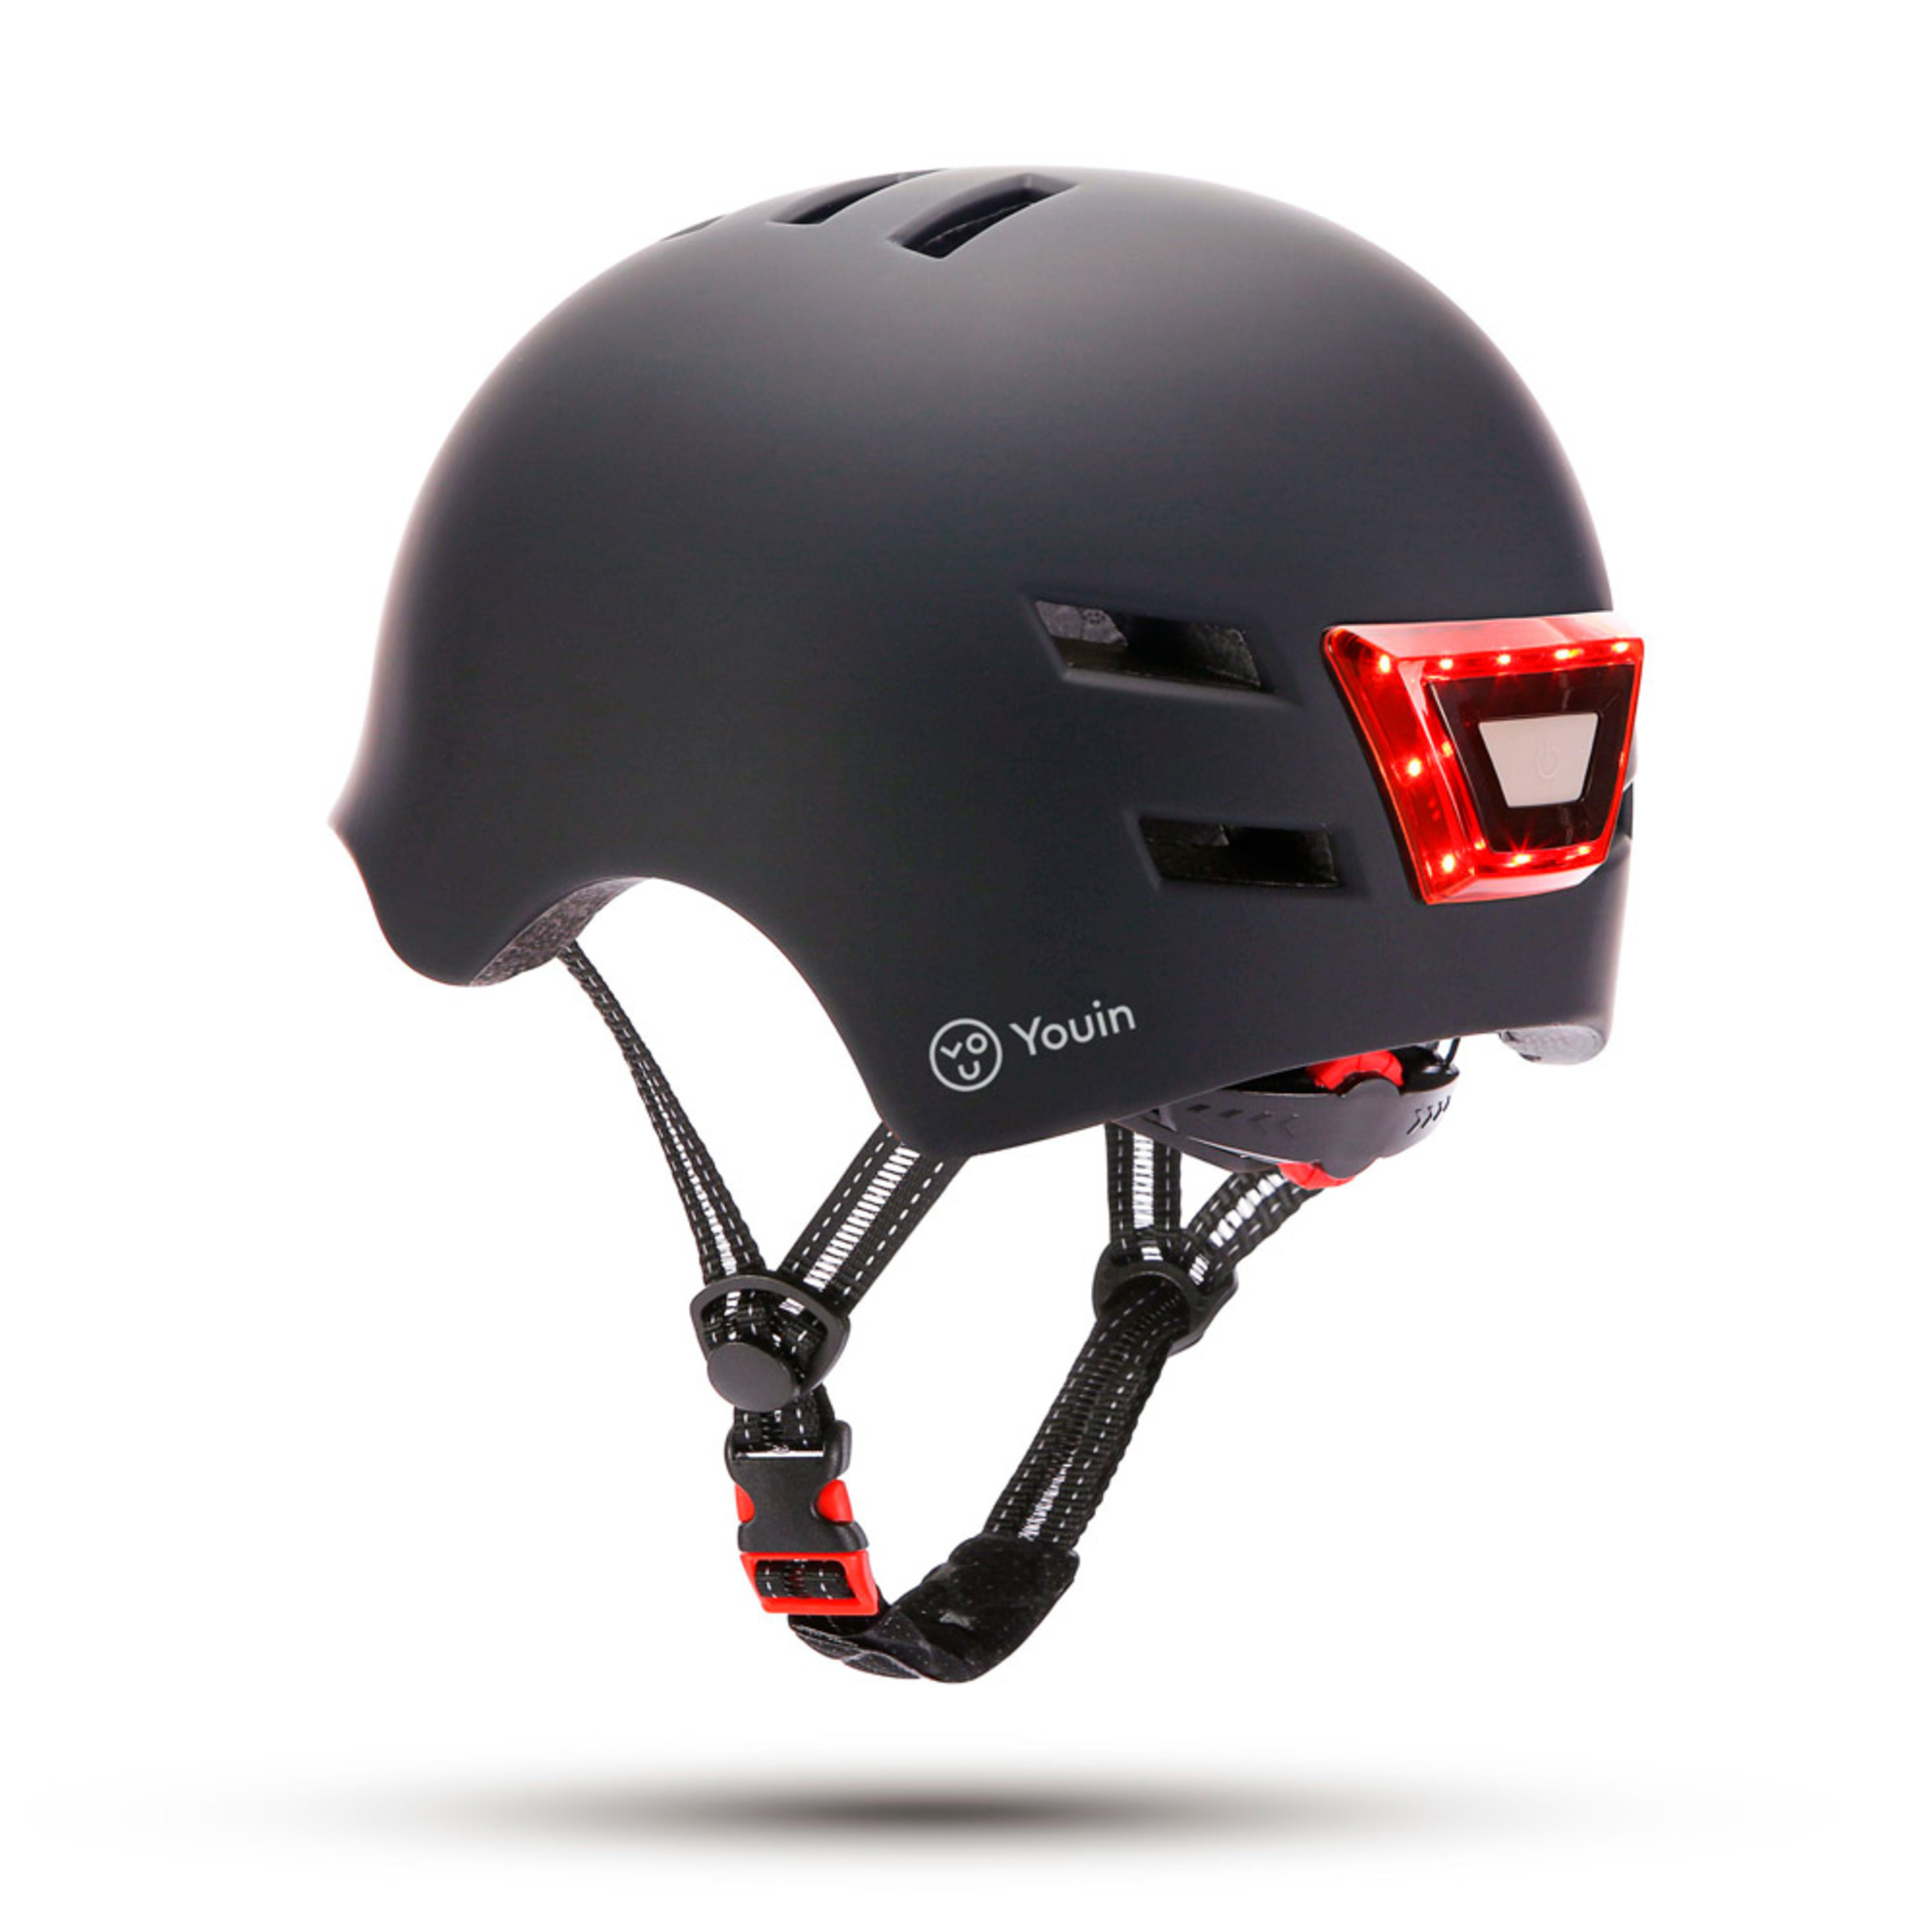 Casco Youin Con Luces Led Frontal Y Trasera Ajustable - Led Frontal Y Trasera Y Ajustable.  MKP